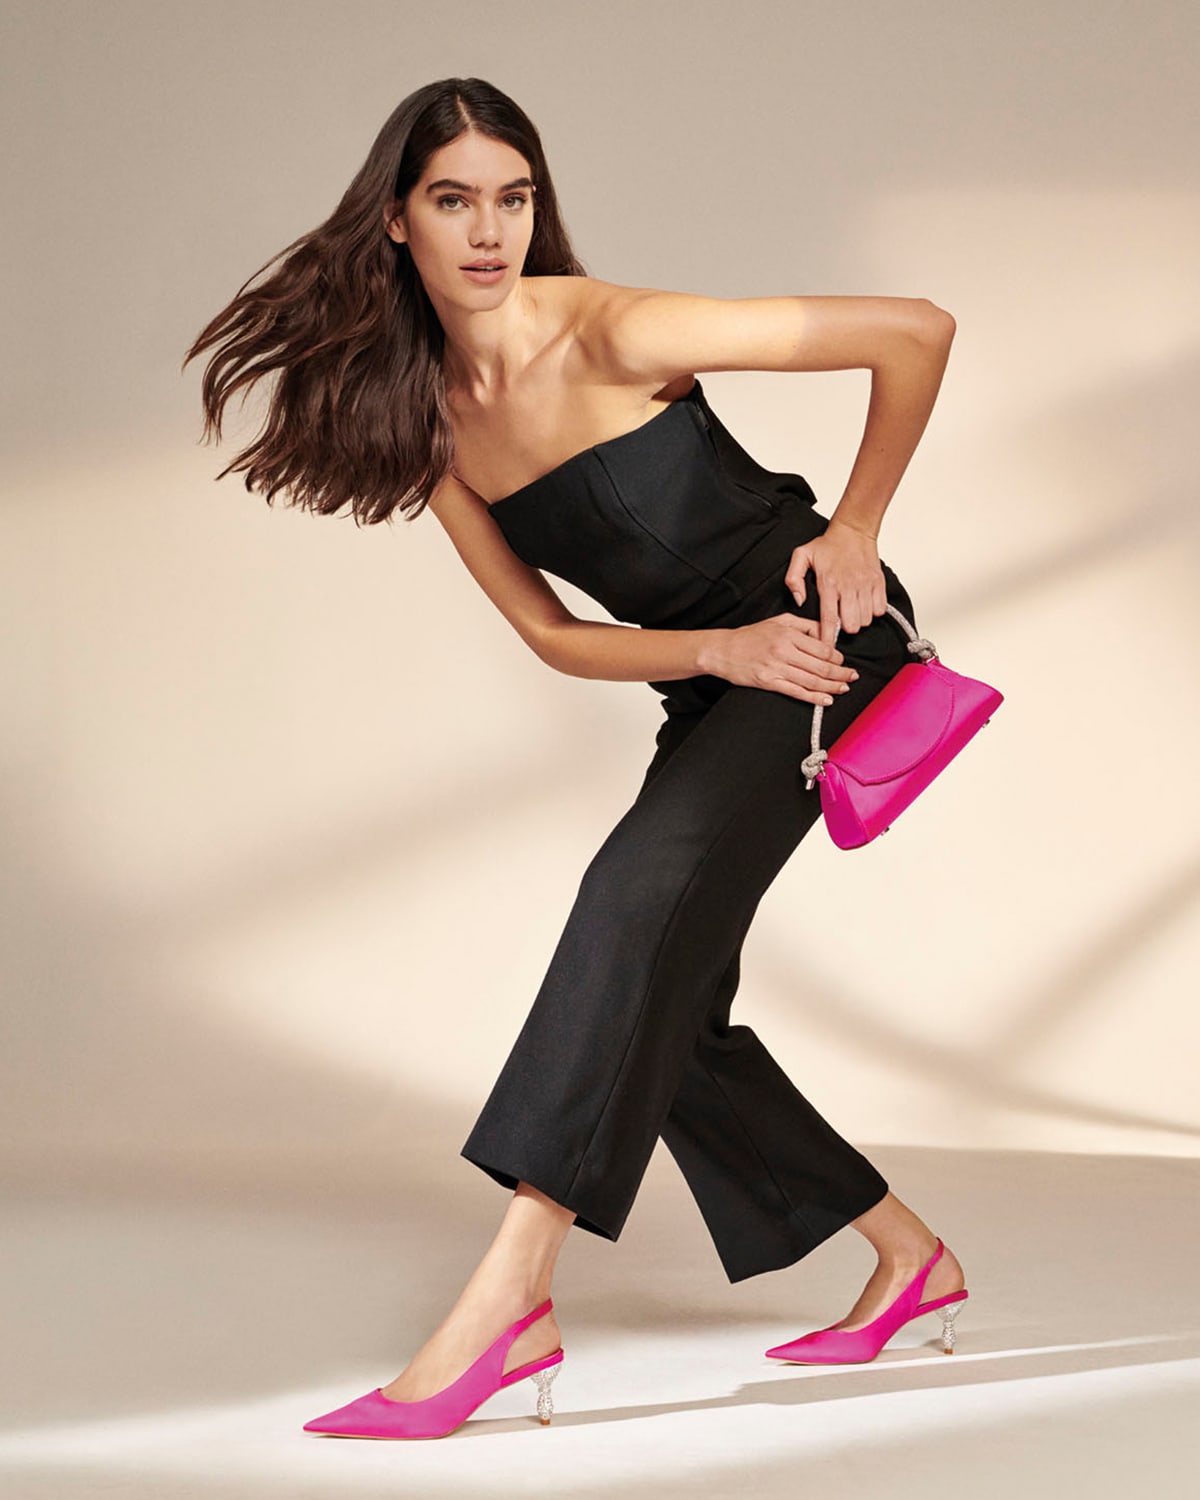 Model image of our pink Brynley bag and Cristal slingback courts